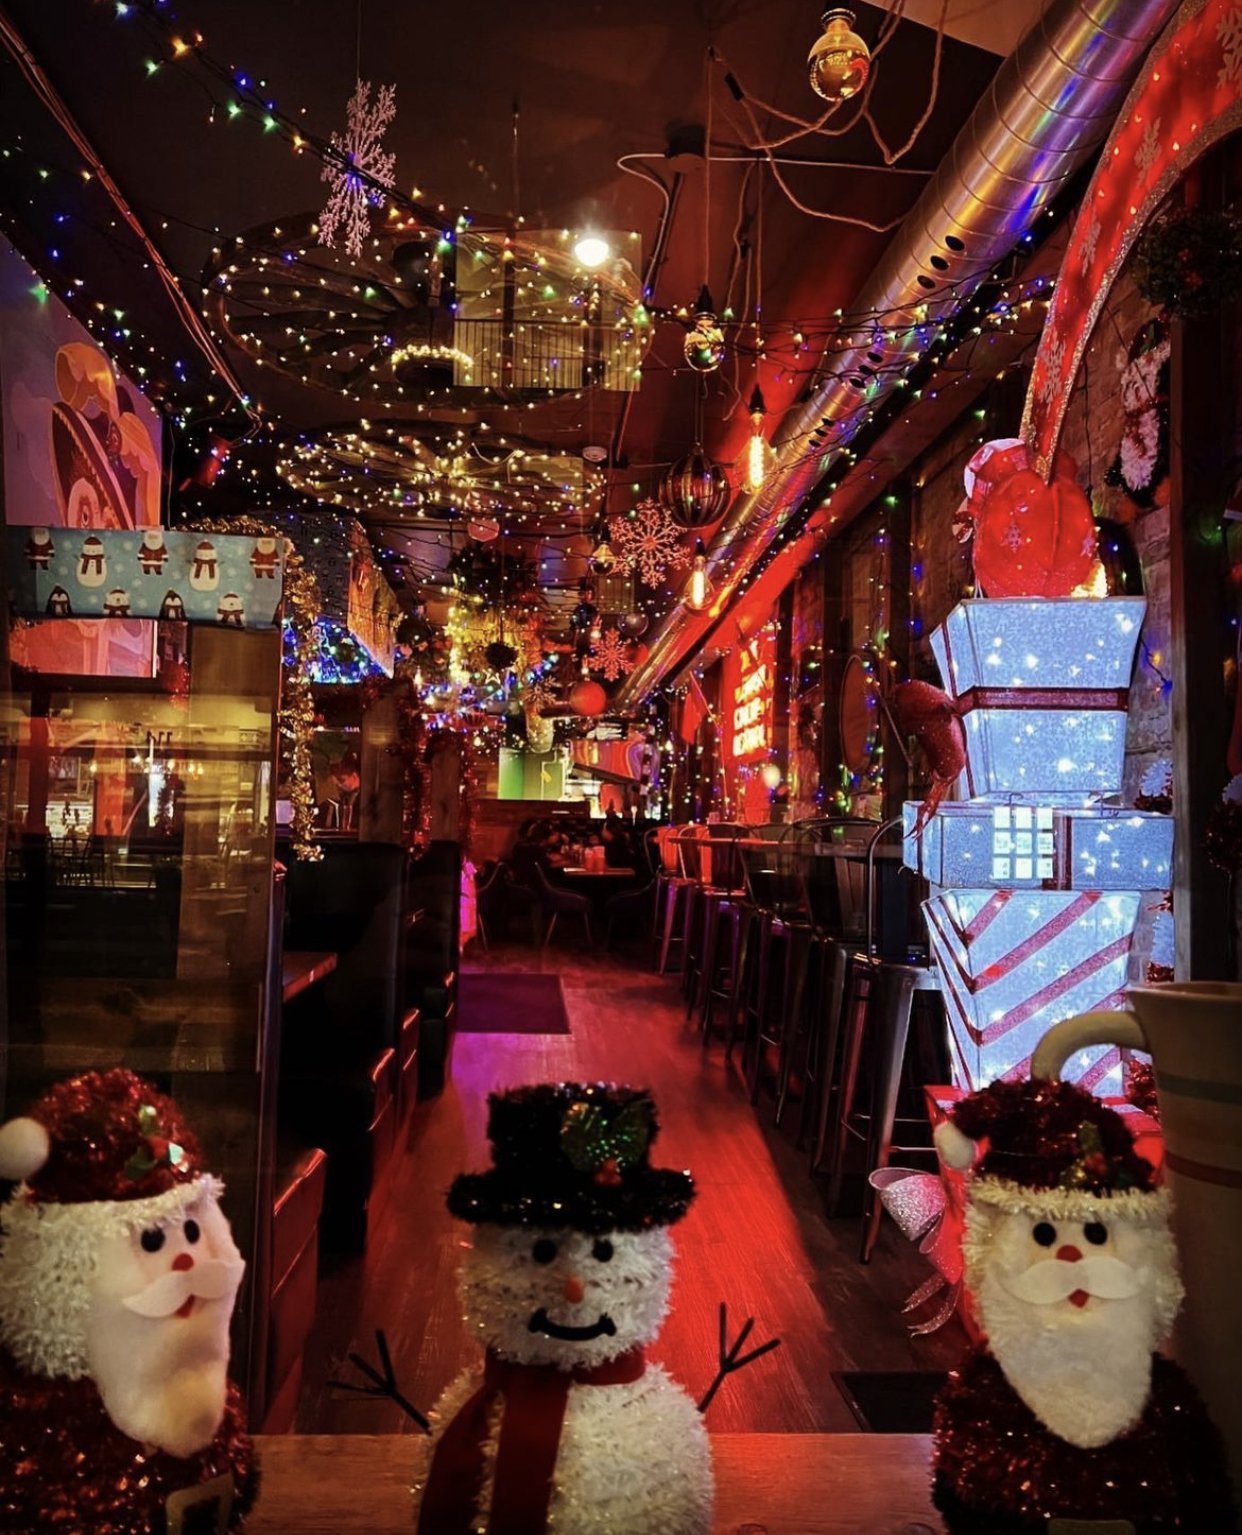 Looking for a Christmas themed bar to enjoy a festive drink in this holiday season? This is for you! For the last few years Christmas bars have been popping up in Toronto during the holiday season and they are so much fun. From festive cocktails to over the top holiday decor, here are the Toronto Christmas bars that you need to check out in 2022. Pictured here: Papi Chulo's Mistletoe & Margaritas